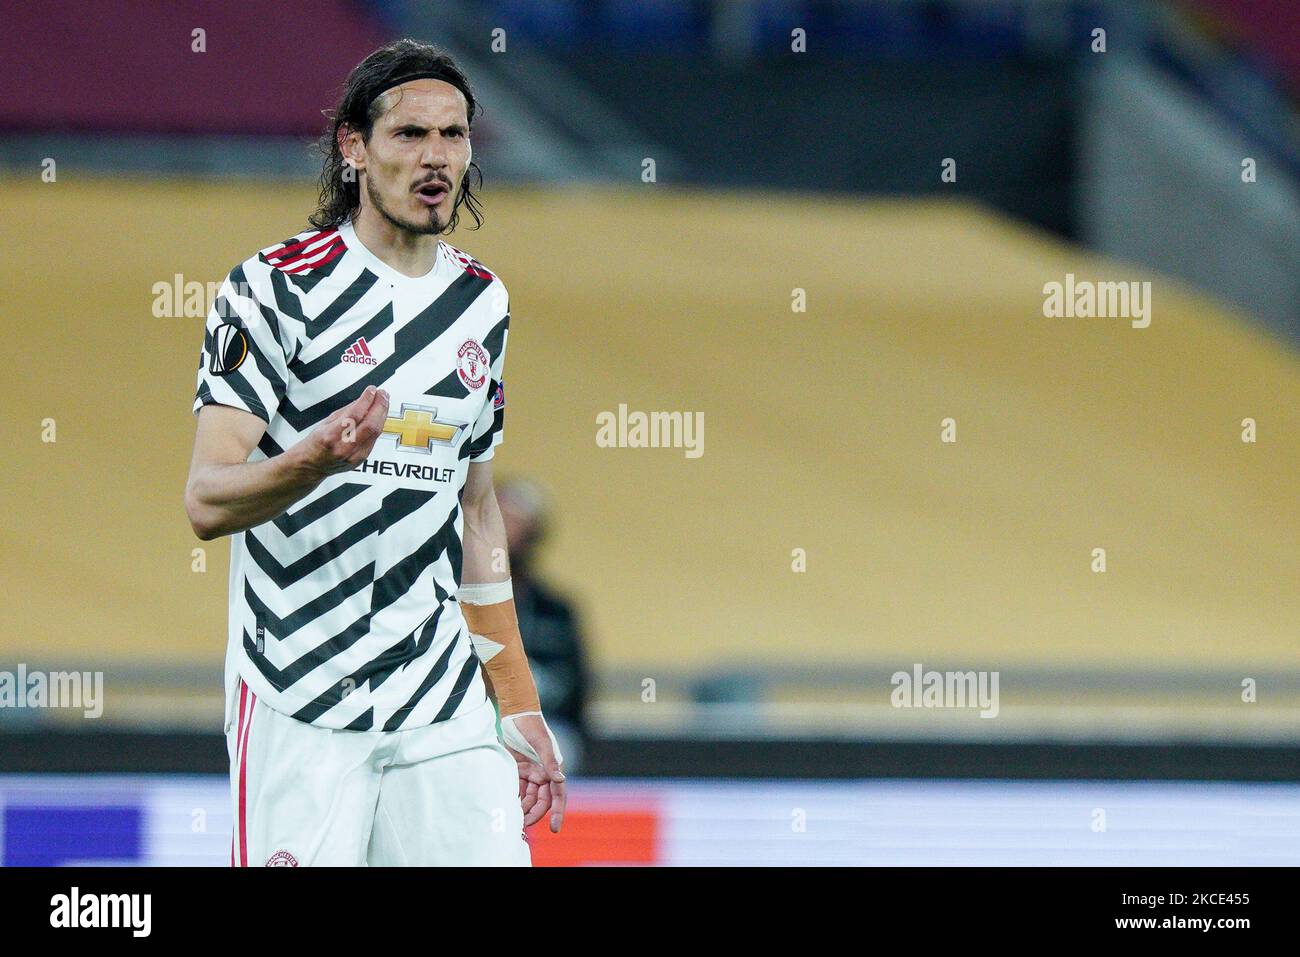 Edinson Cavani of Manchester United gestures during the UEFA Europa League Semi-Final match between AS Roma and Manchester United at Stadio Olimpico, Rome, Italy on 6 May 2021. (Photo by Giuseppe Maffia/NurPhoto) Stock Photo